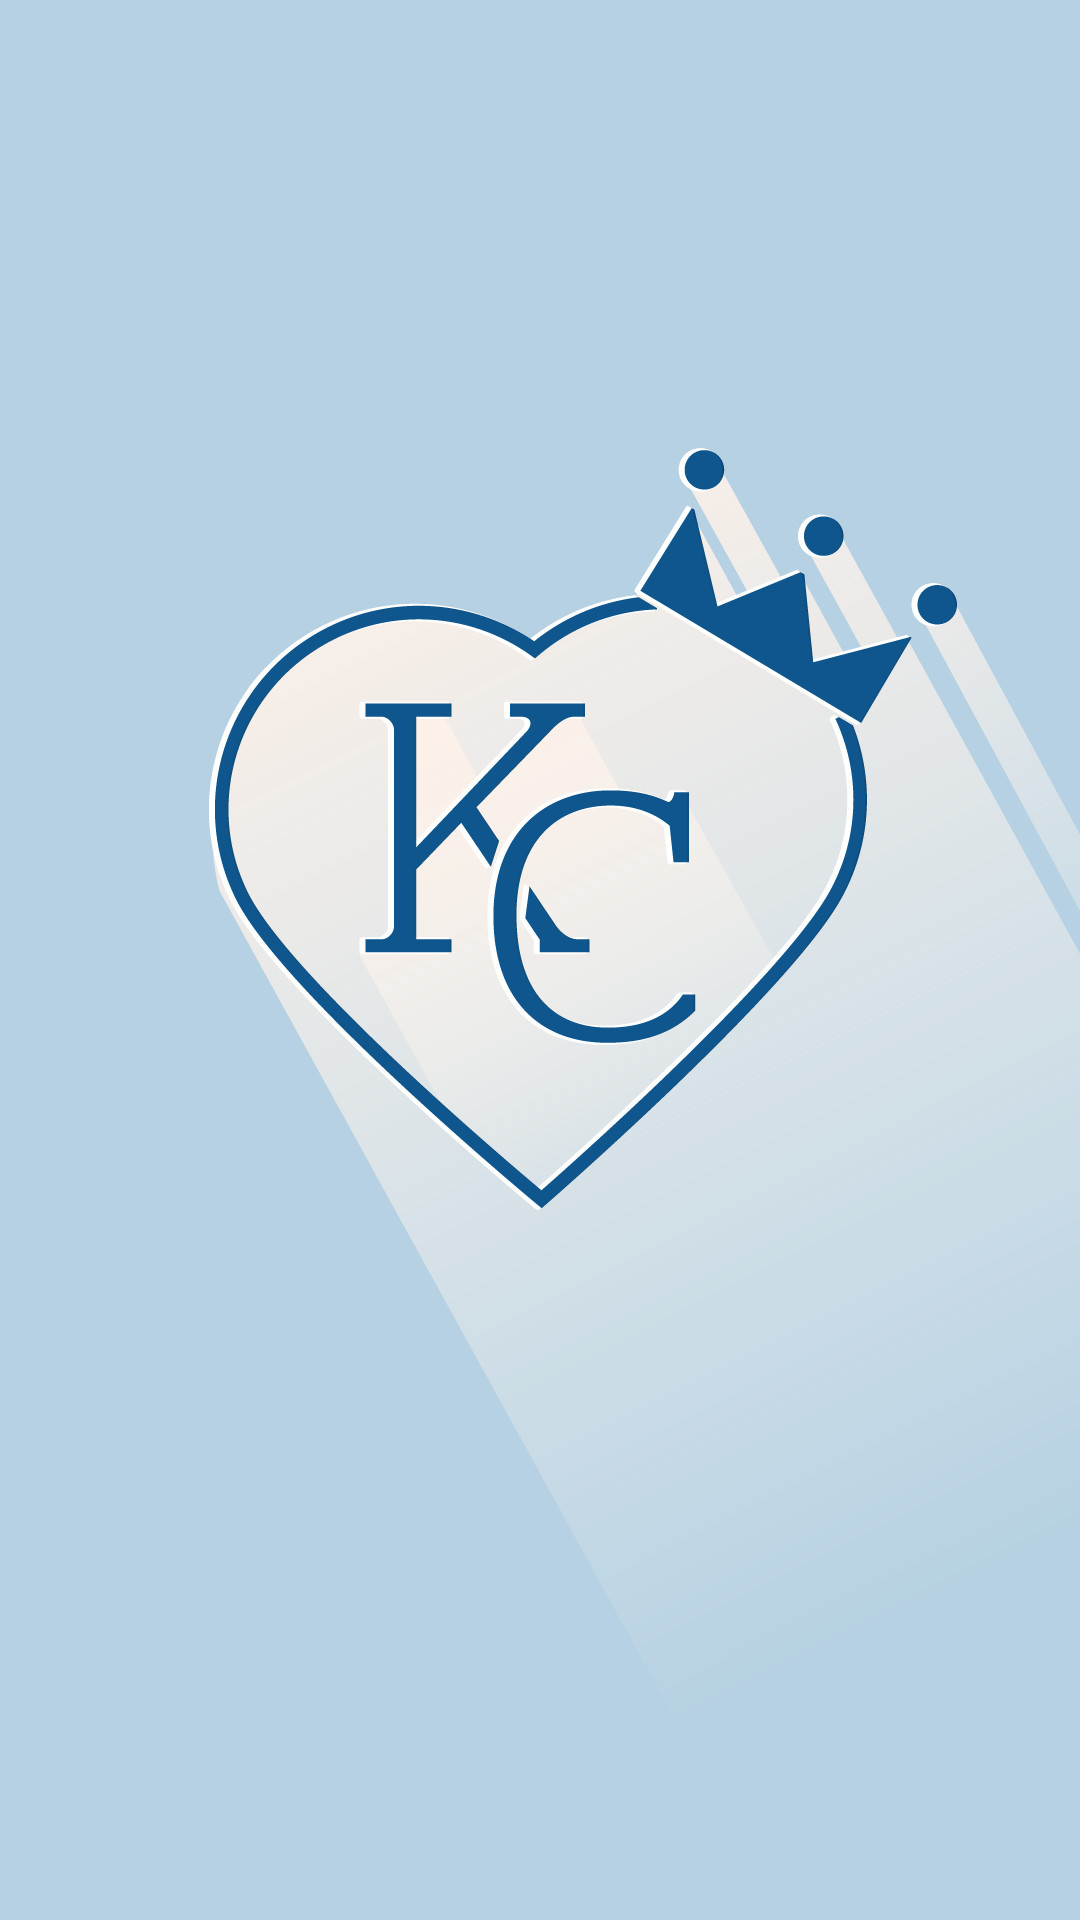 Royals Iphone Wallpapers